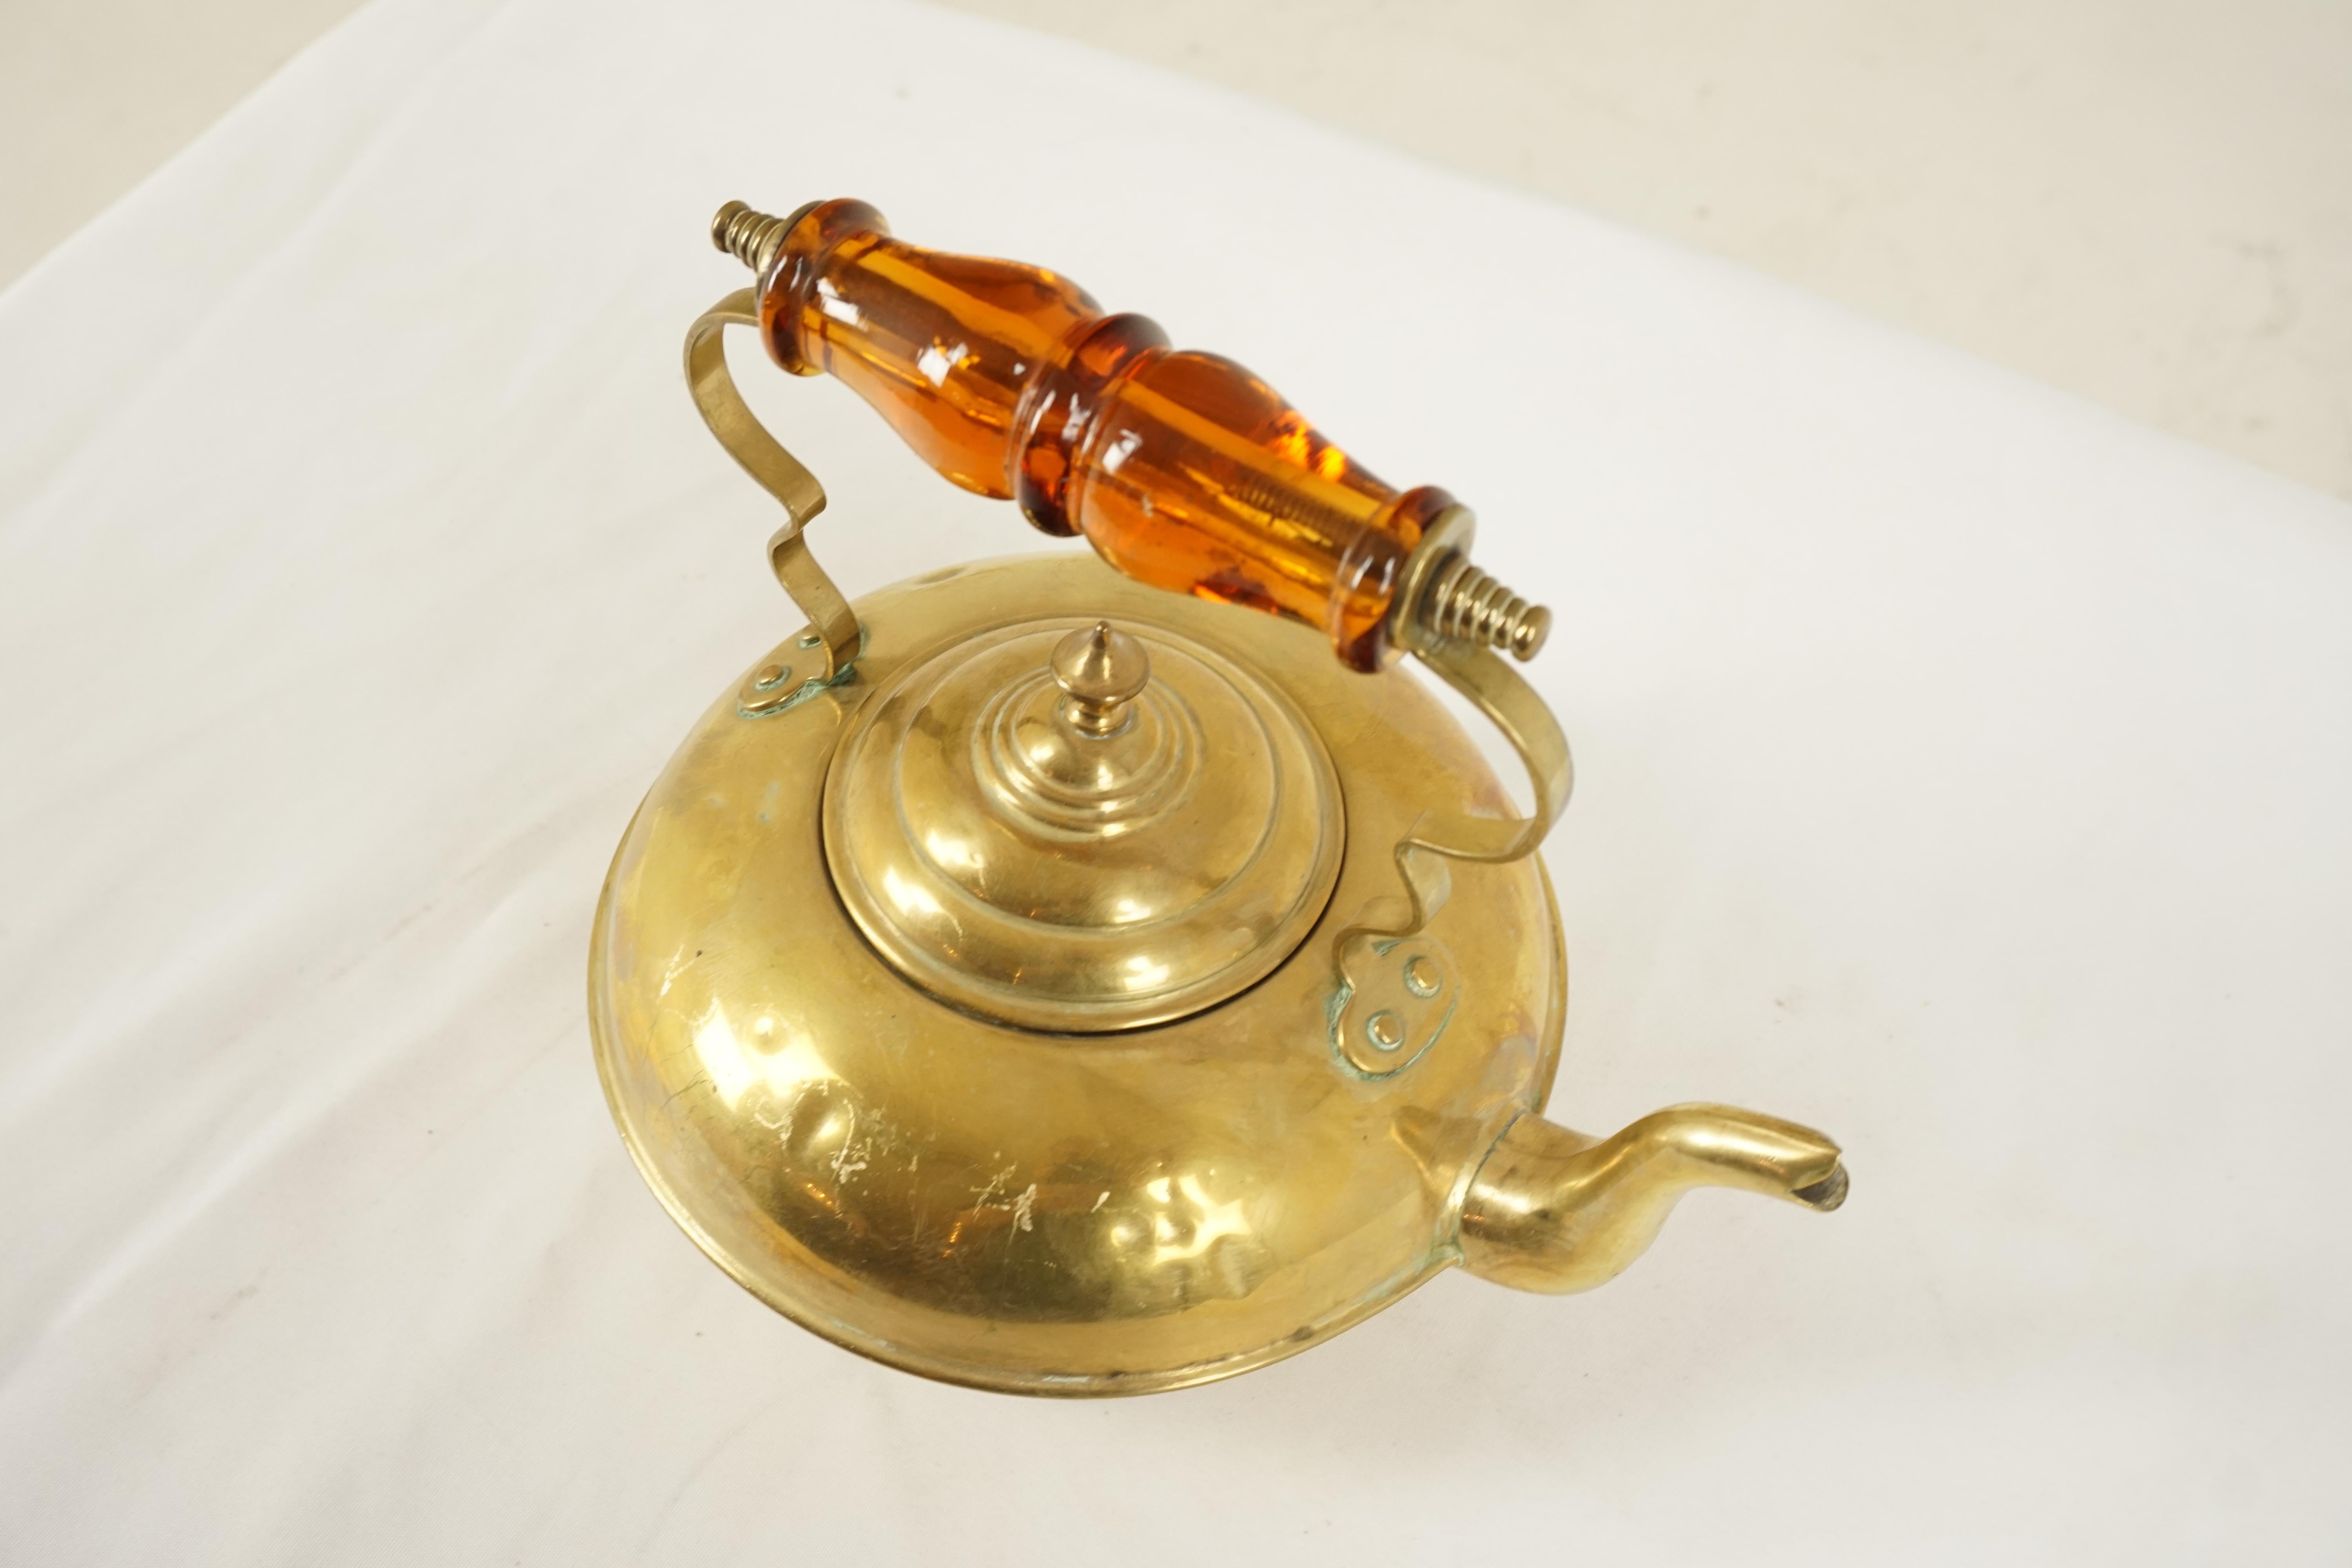 Antique Victorian Kettle, Brass Toddy Kettle, Amber Handle, Scotland 1890, B75y

Scotland 1890
Brass 
Elegant shaped circular body with classic sprout
Amber handle to the top
Tin lining to the inside of the kettle
Kettle stands on three